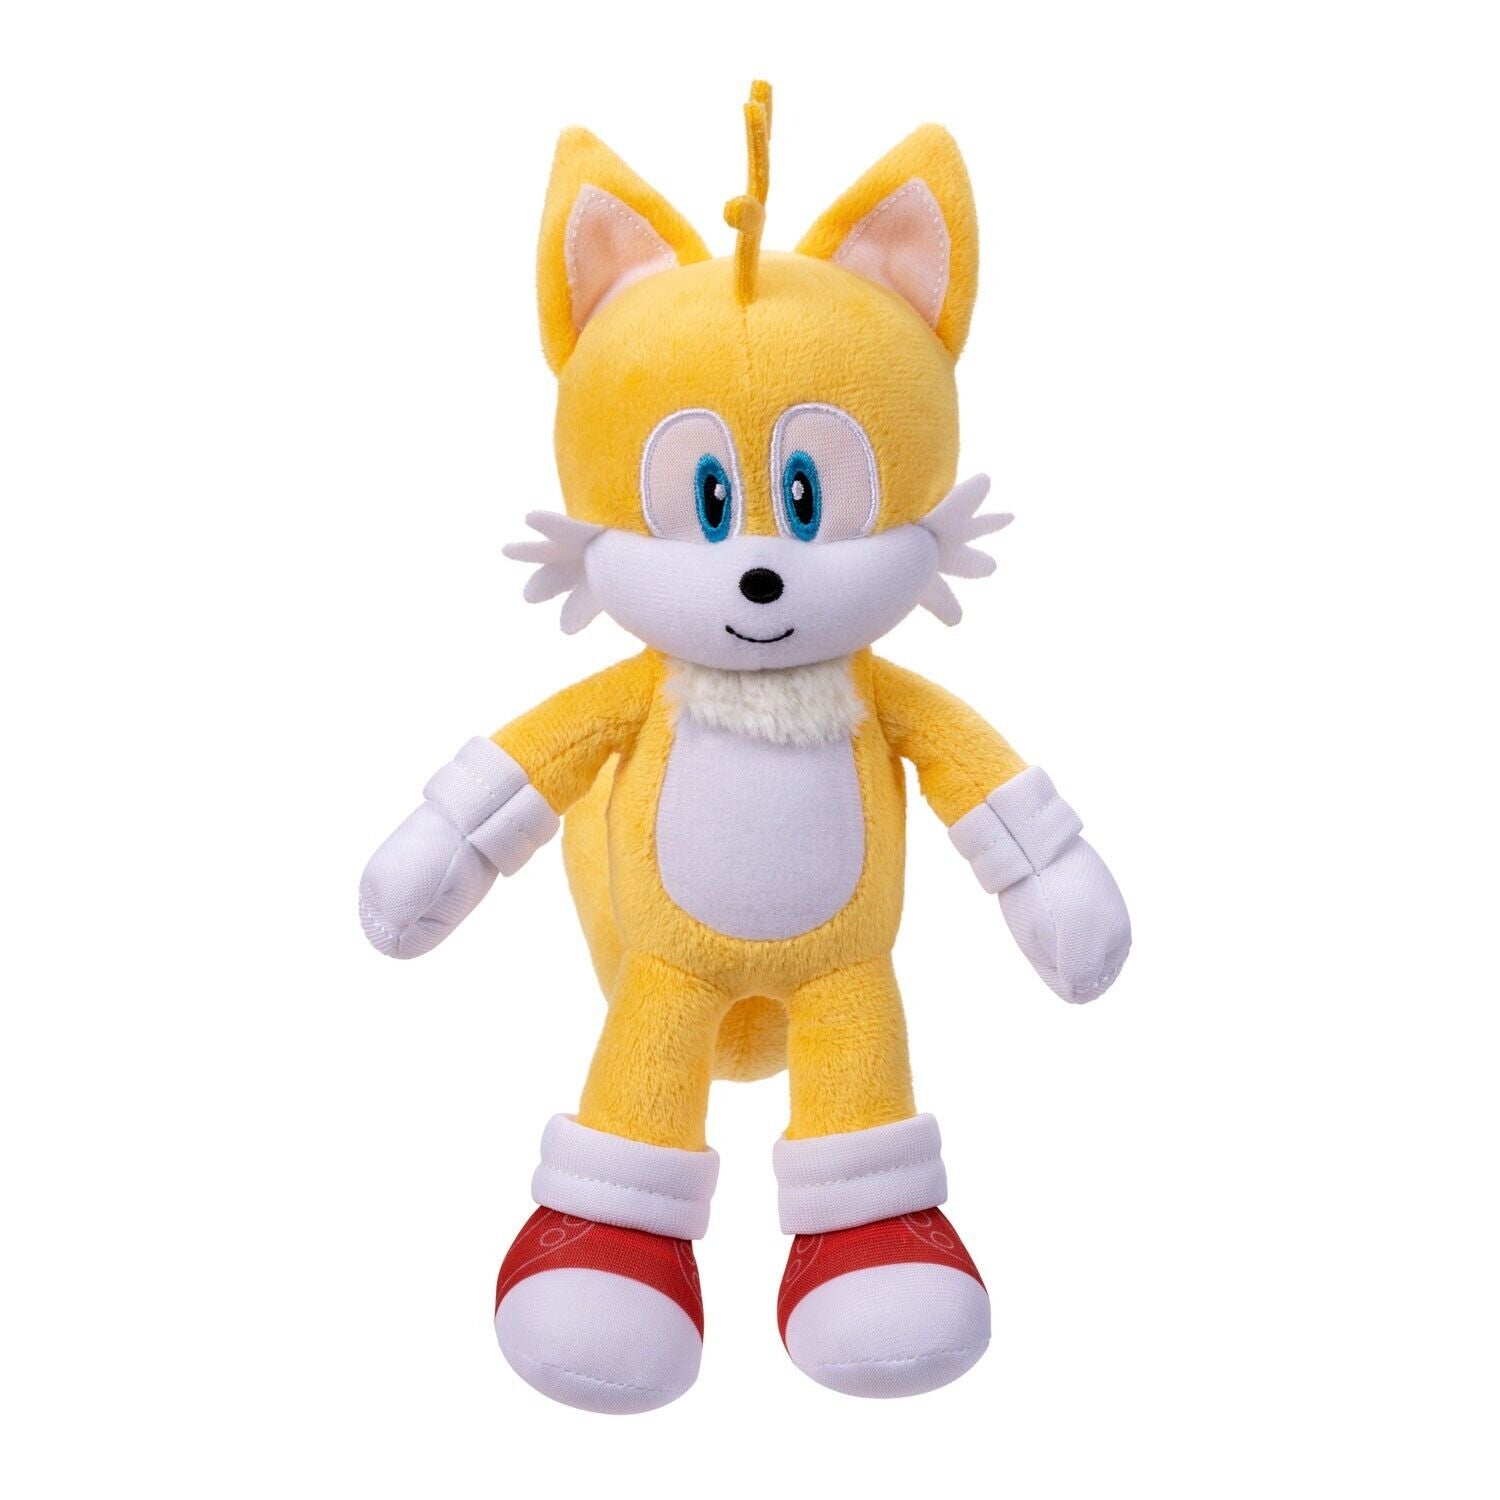 New Sonic The Hedgehog 2 Movie 9-Inch Plush Tails - Collectible Toy